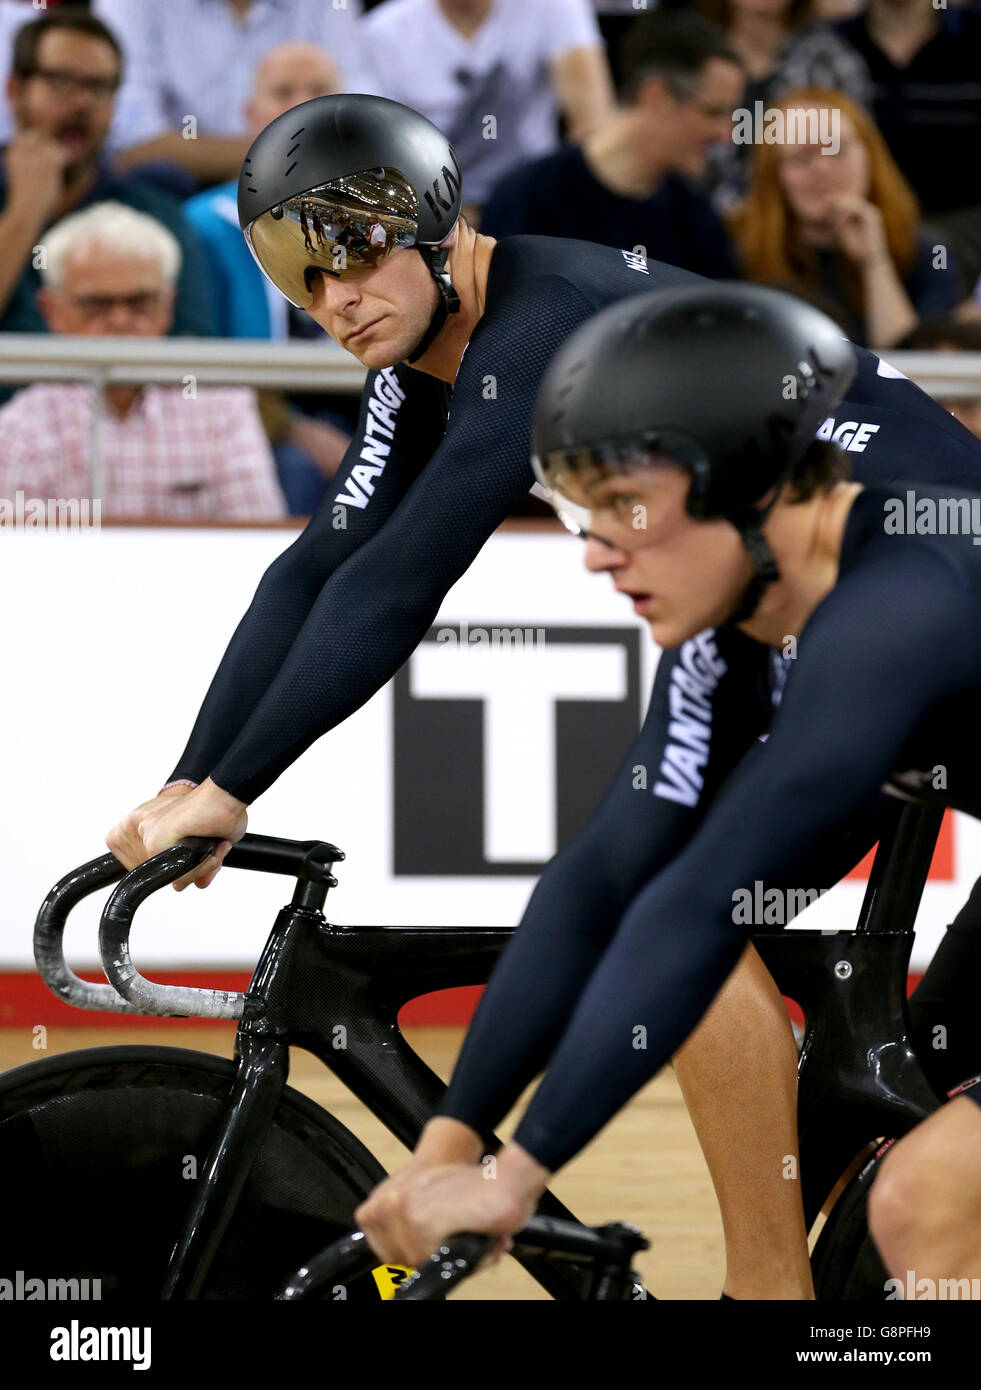 New Zealand's Edward Dawkins before the Men's Team Sprint during day one of the UCI Track Cycling World Championships at Lee Valley VeloPark, London. Stock Photo